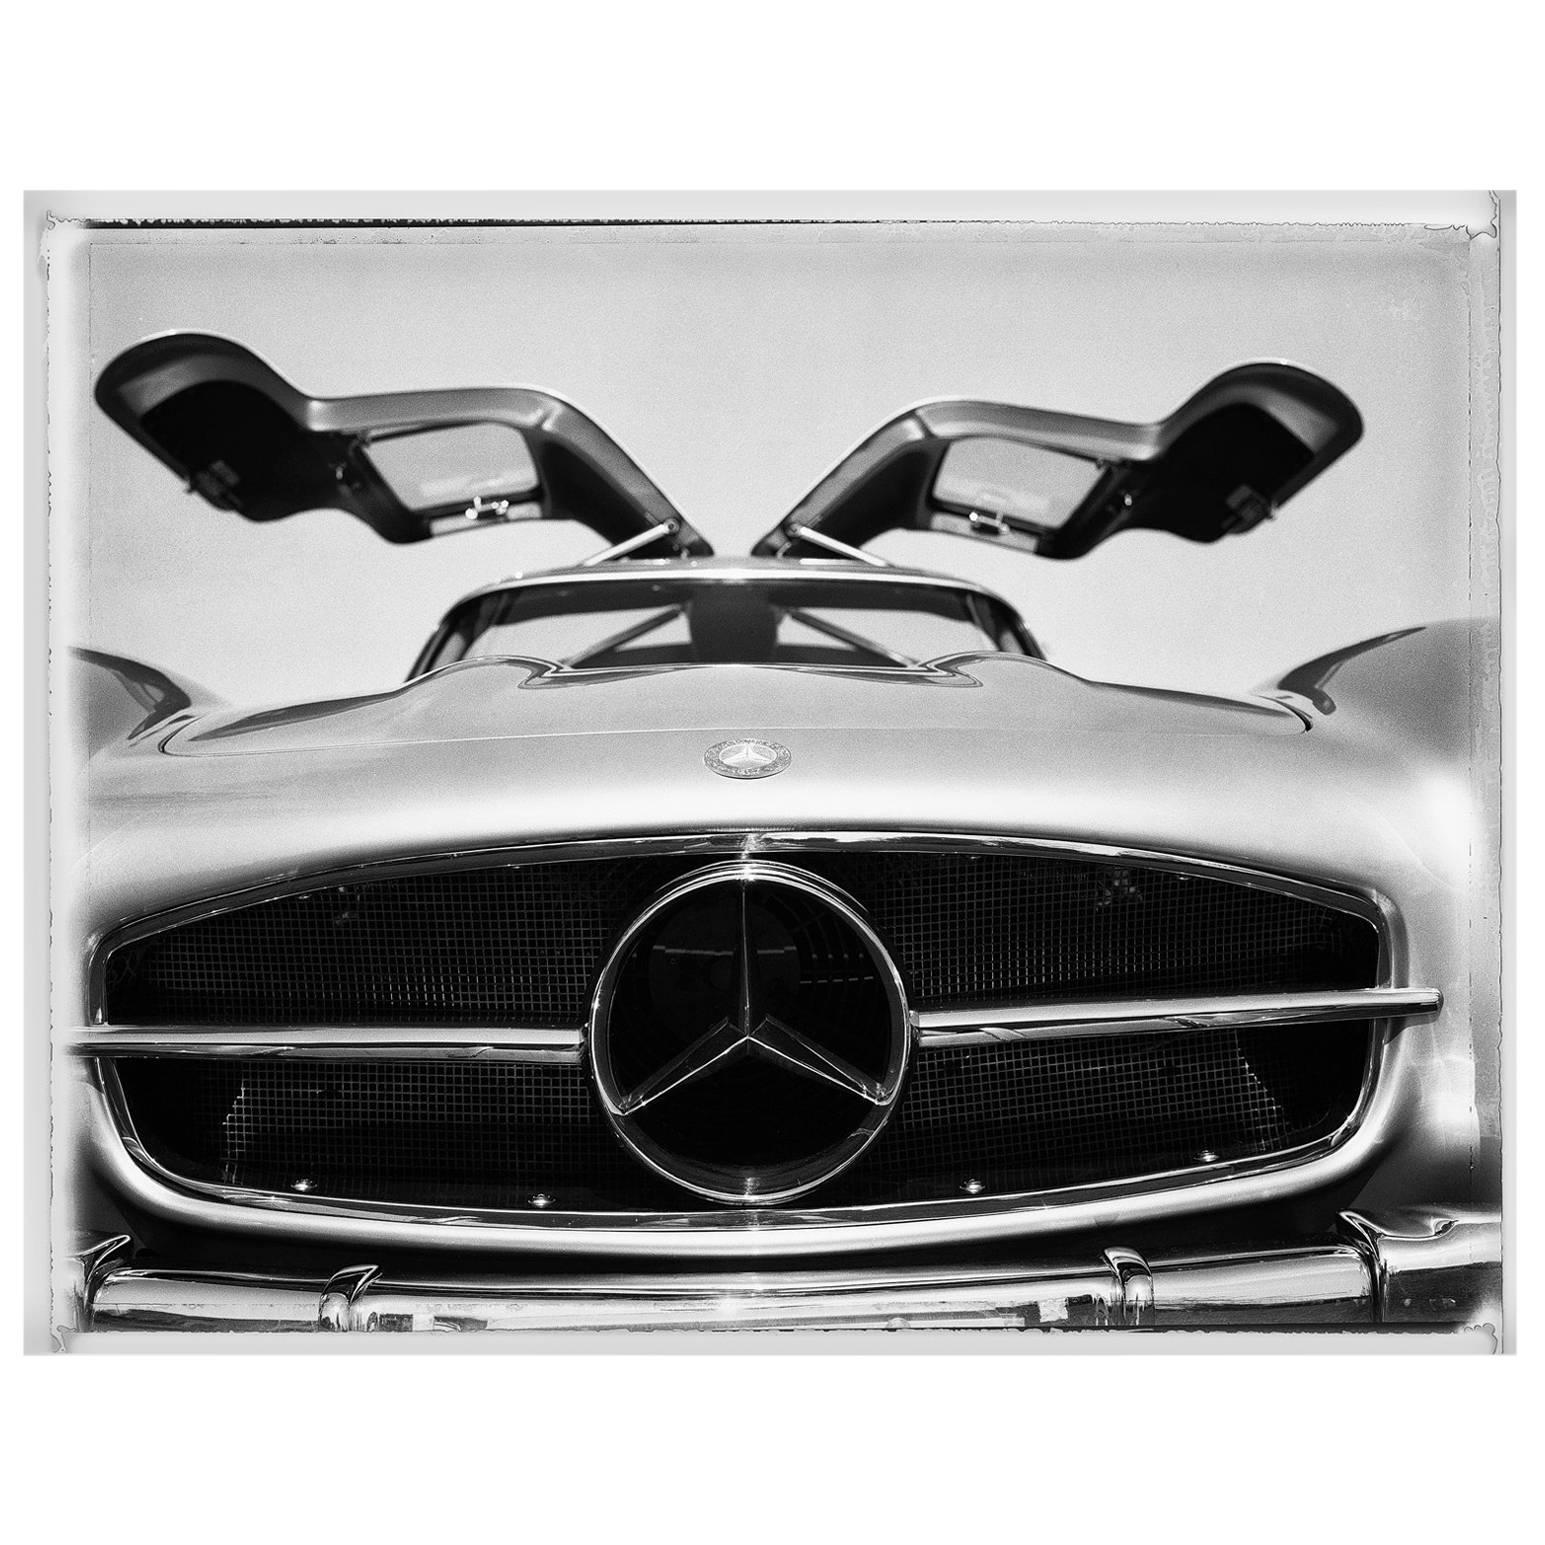 1955 Gullwing Mercedes-Benz Photograph by Charles Baker For Sale